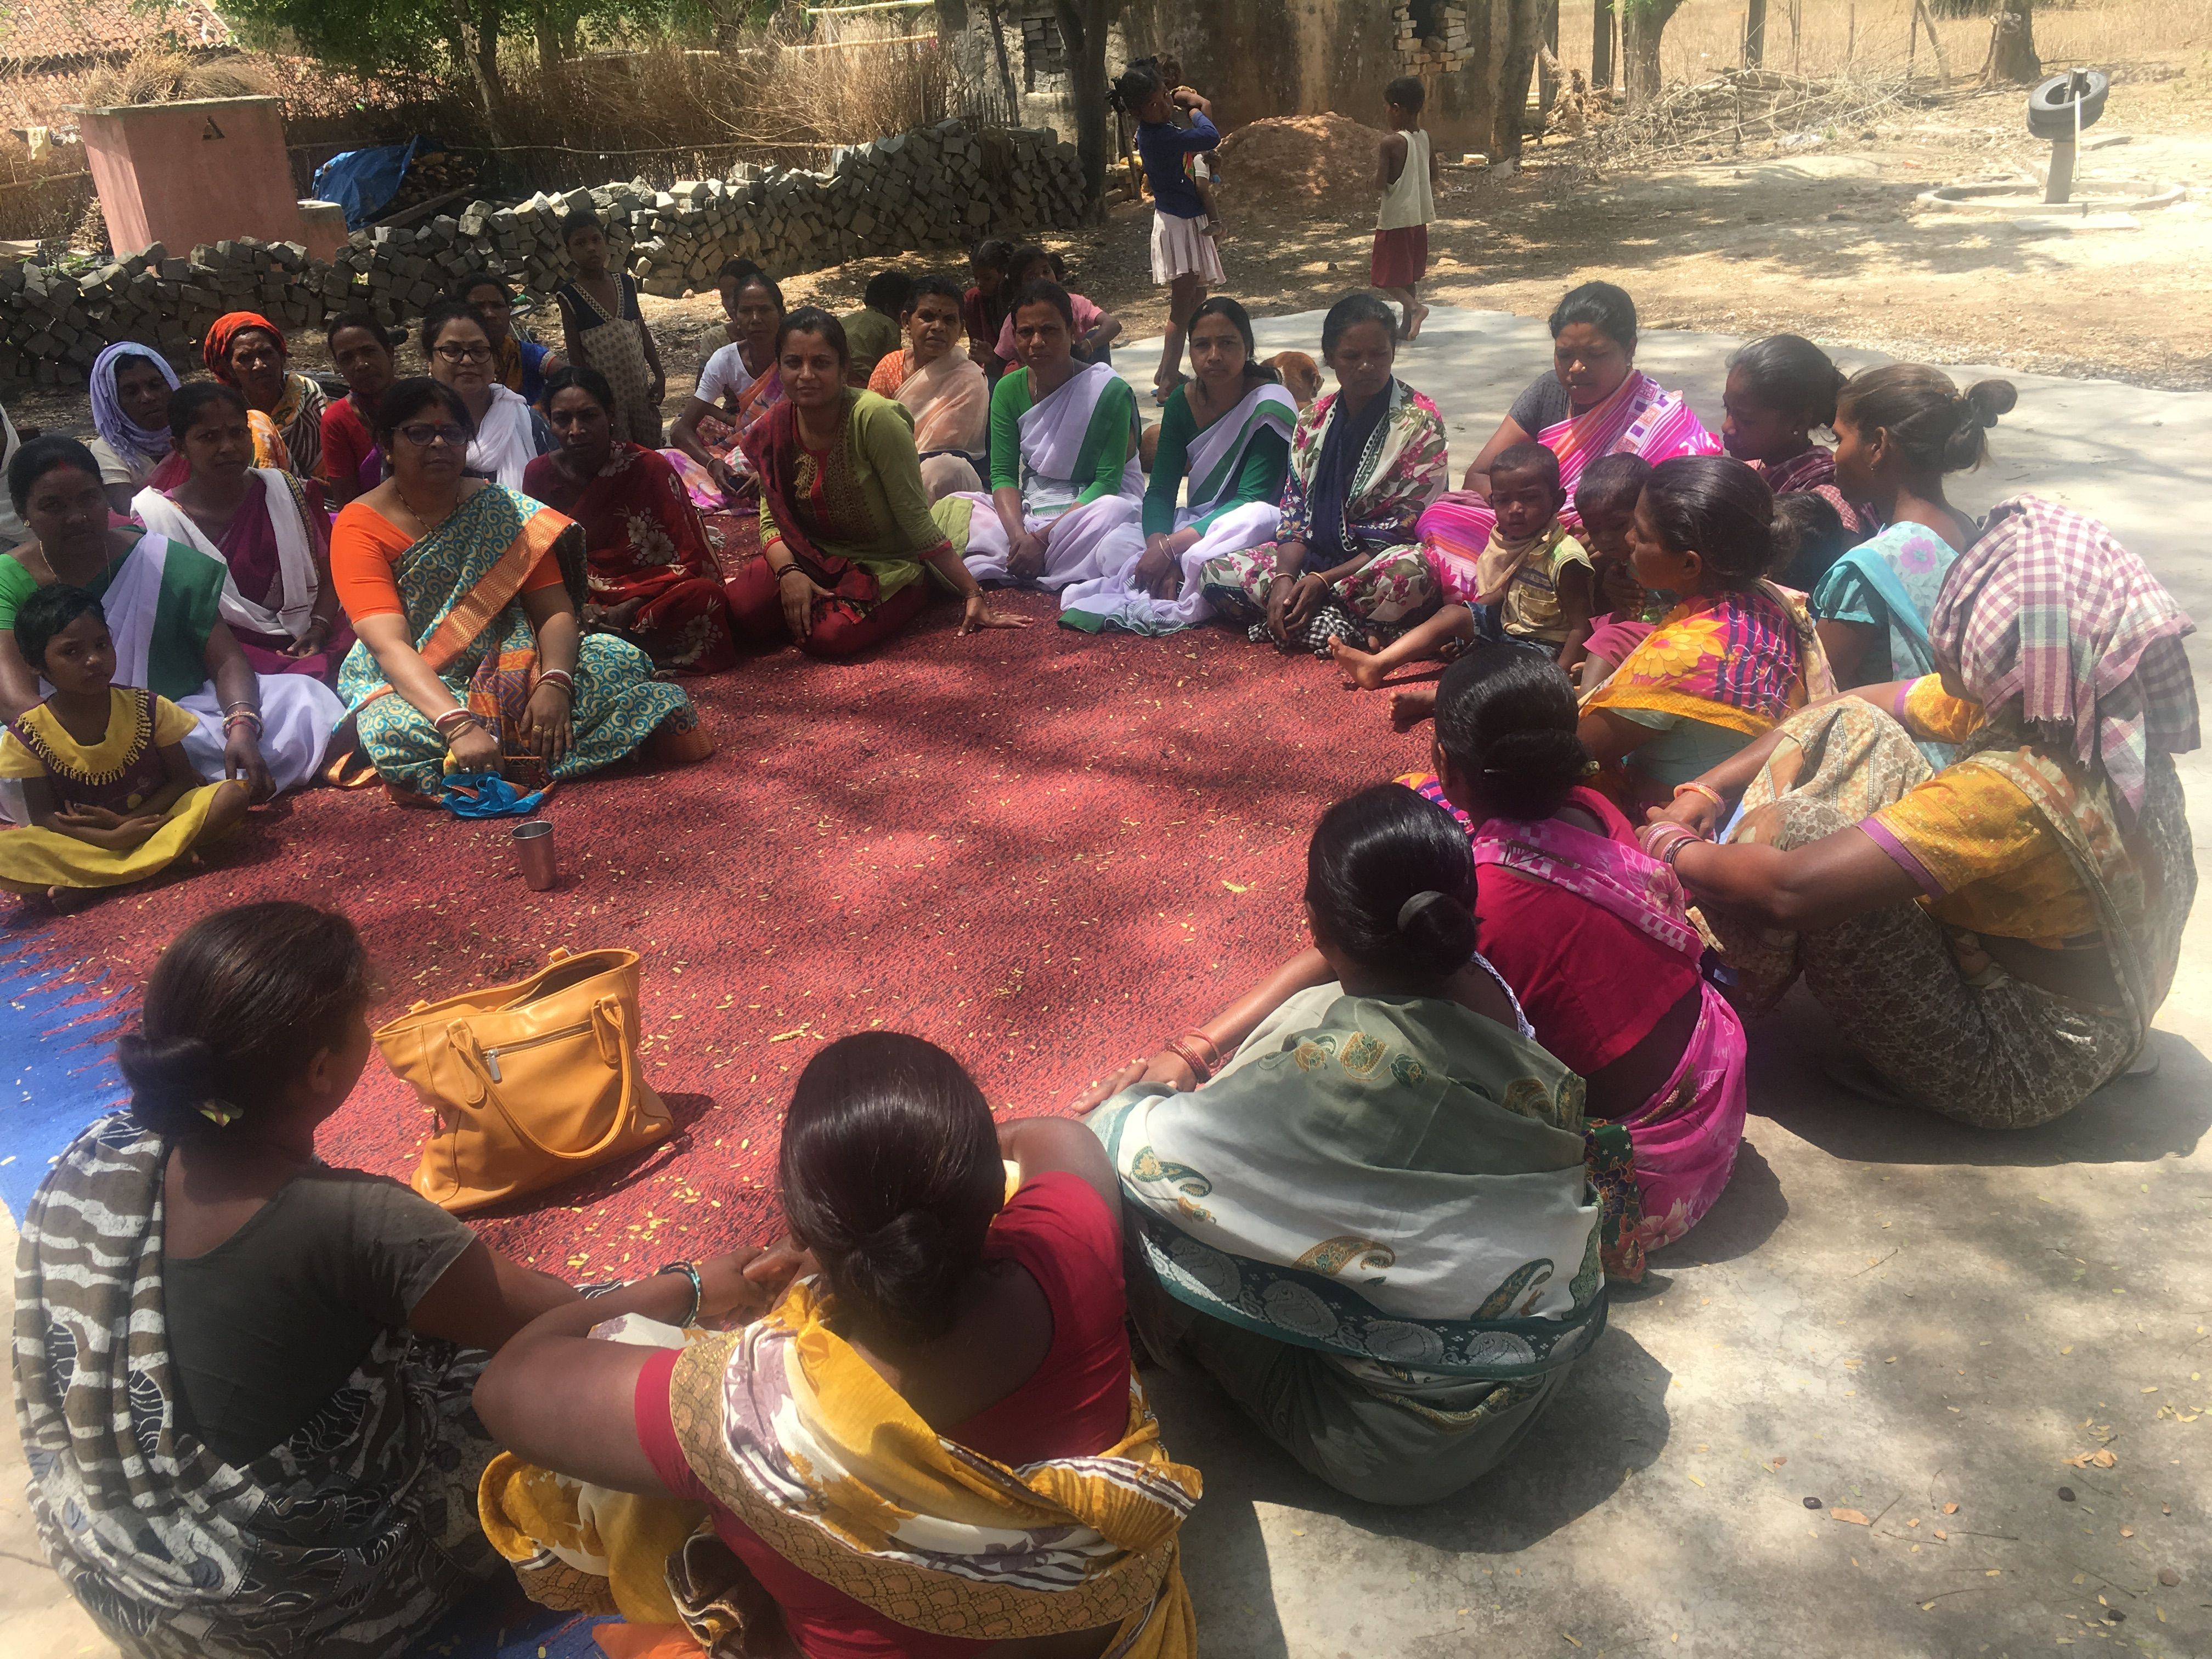 Women gather for saas bahu pati sammelan (meeting of the mother in law, daughter in law and husband) in the village of Khunti, Jharkhand, India. Image by Hannah Harris Green. India, 2018.